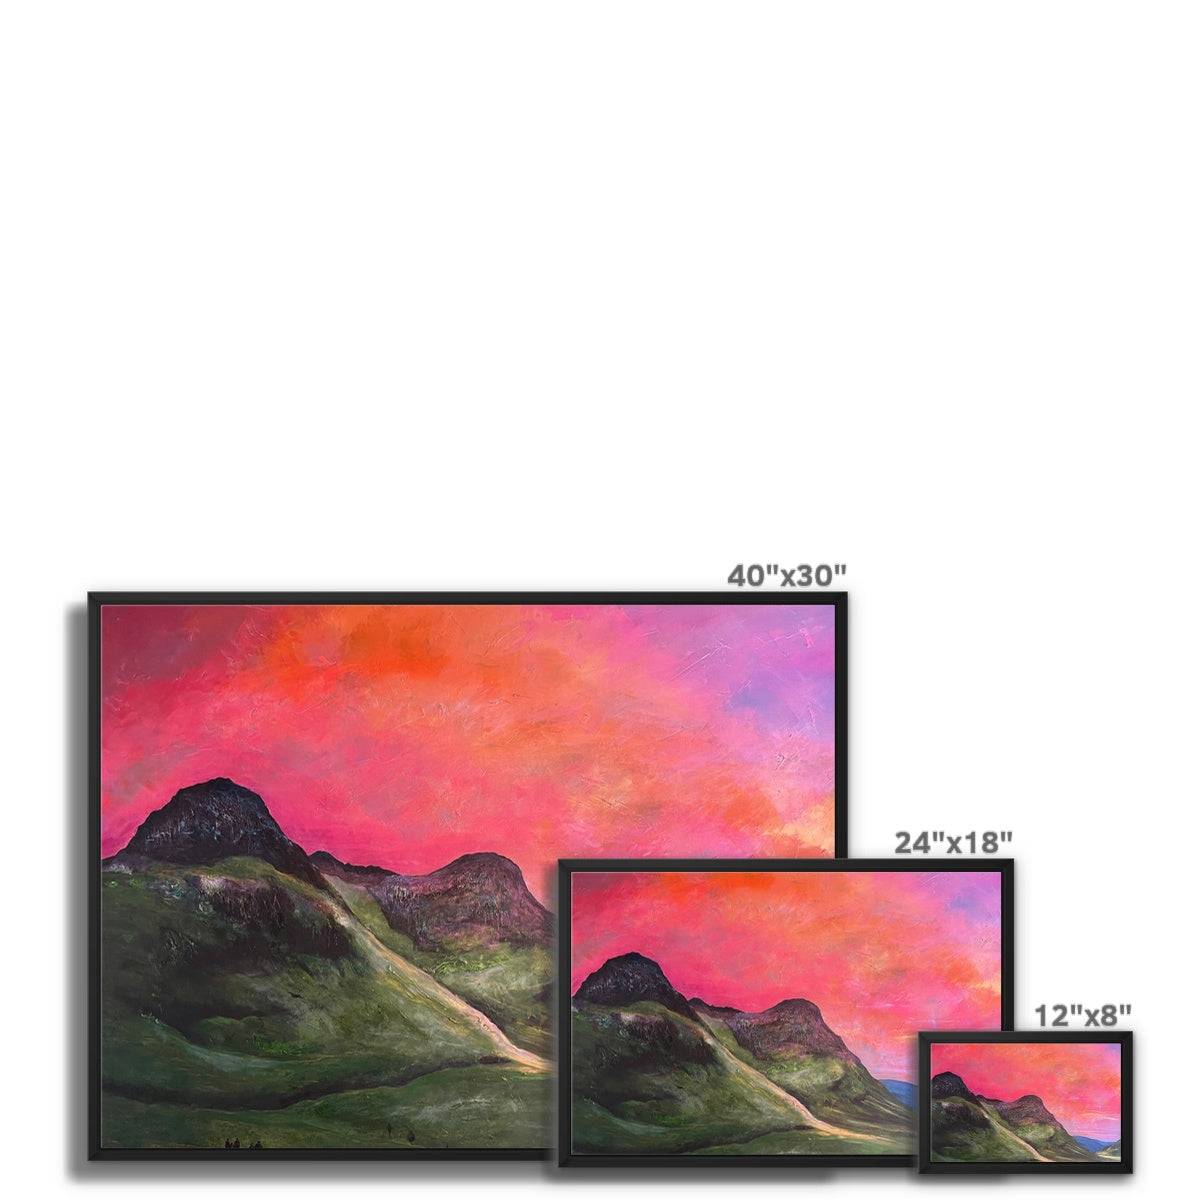 Glencoe Dusk Painting | Framed Canvas From Scotland-Floating Framed Canvas Prints-Glencoe Art Gallery-Paintings, Prints, Homeware, Art Gifts From Scotland By Scottish Artist Kevin Hunter